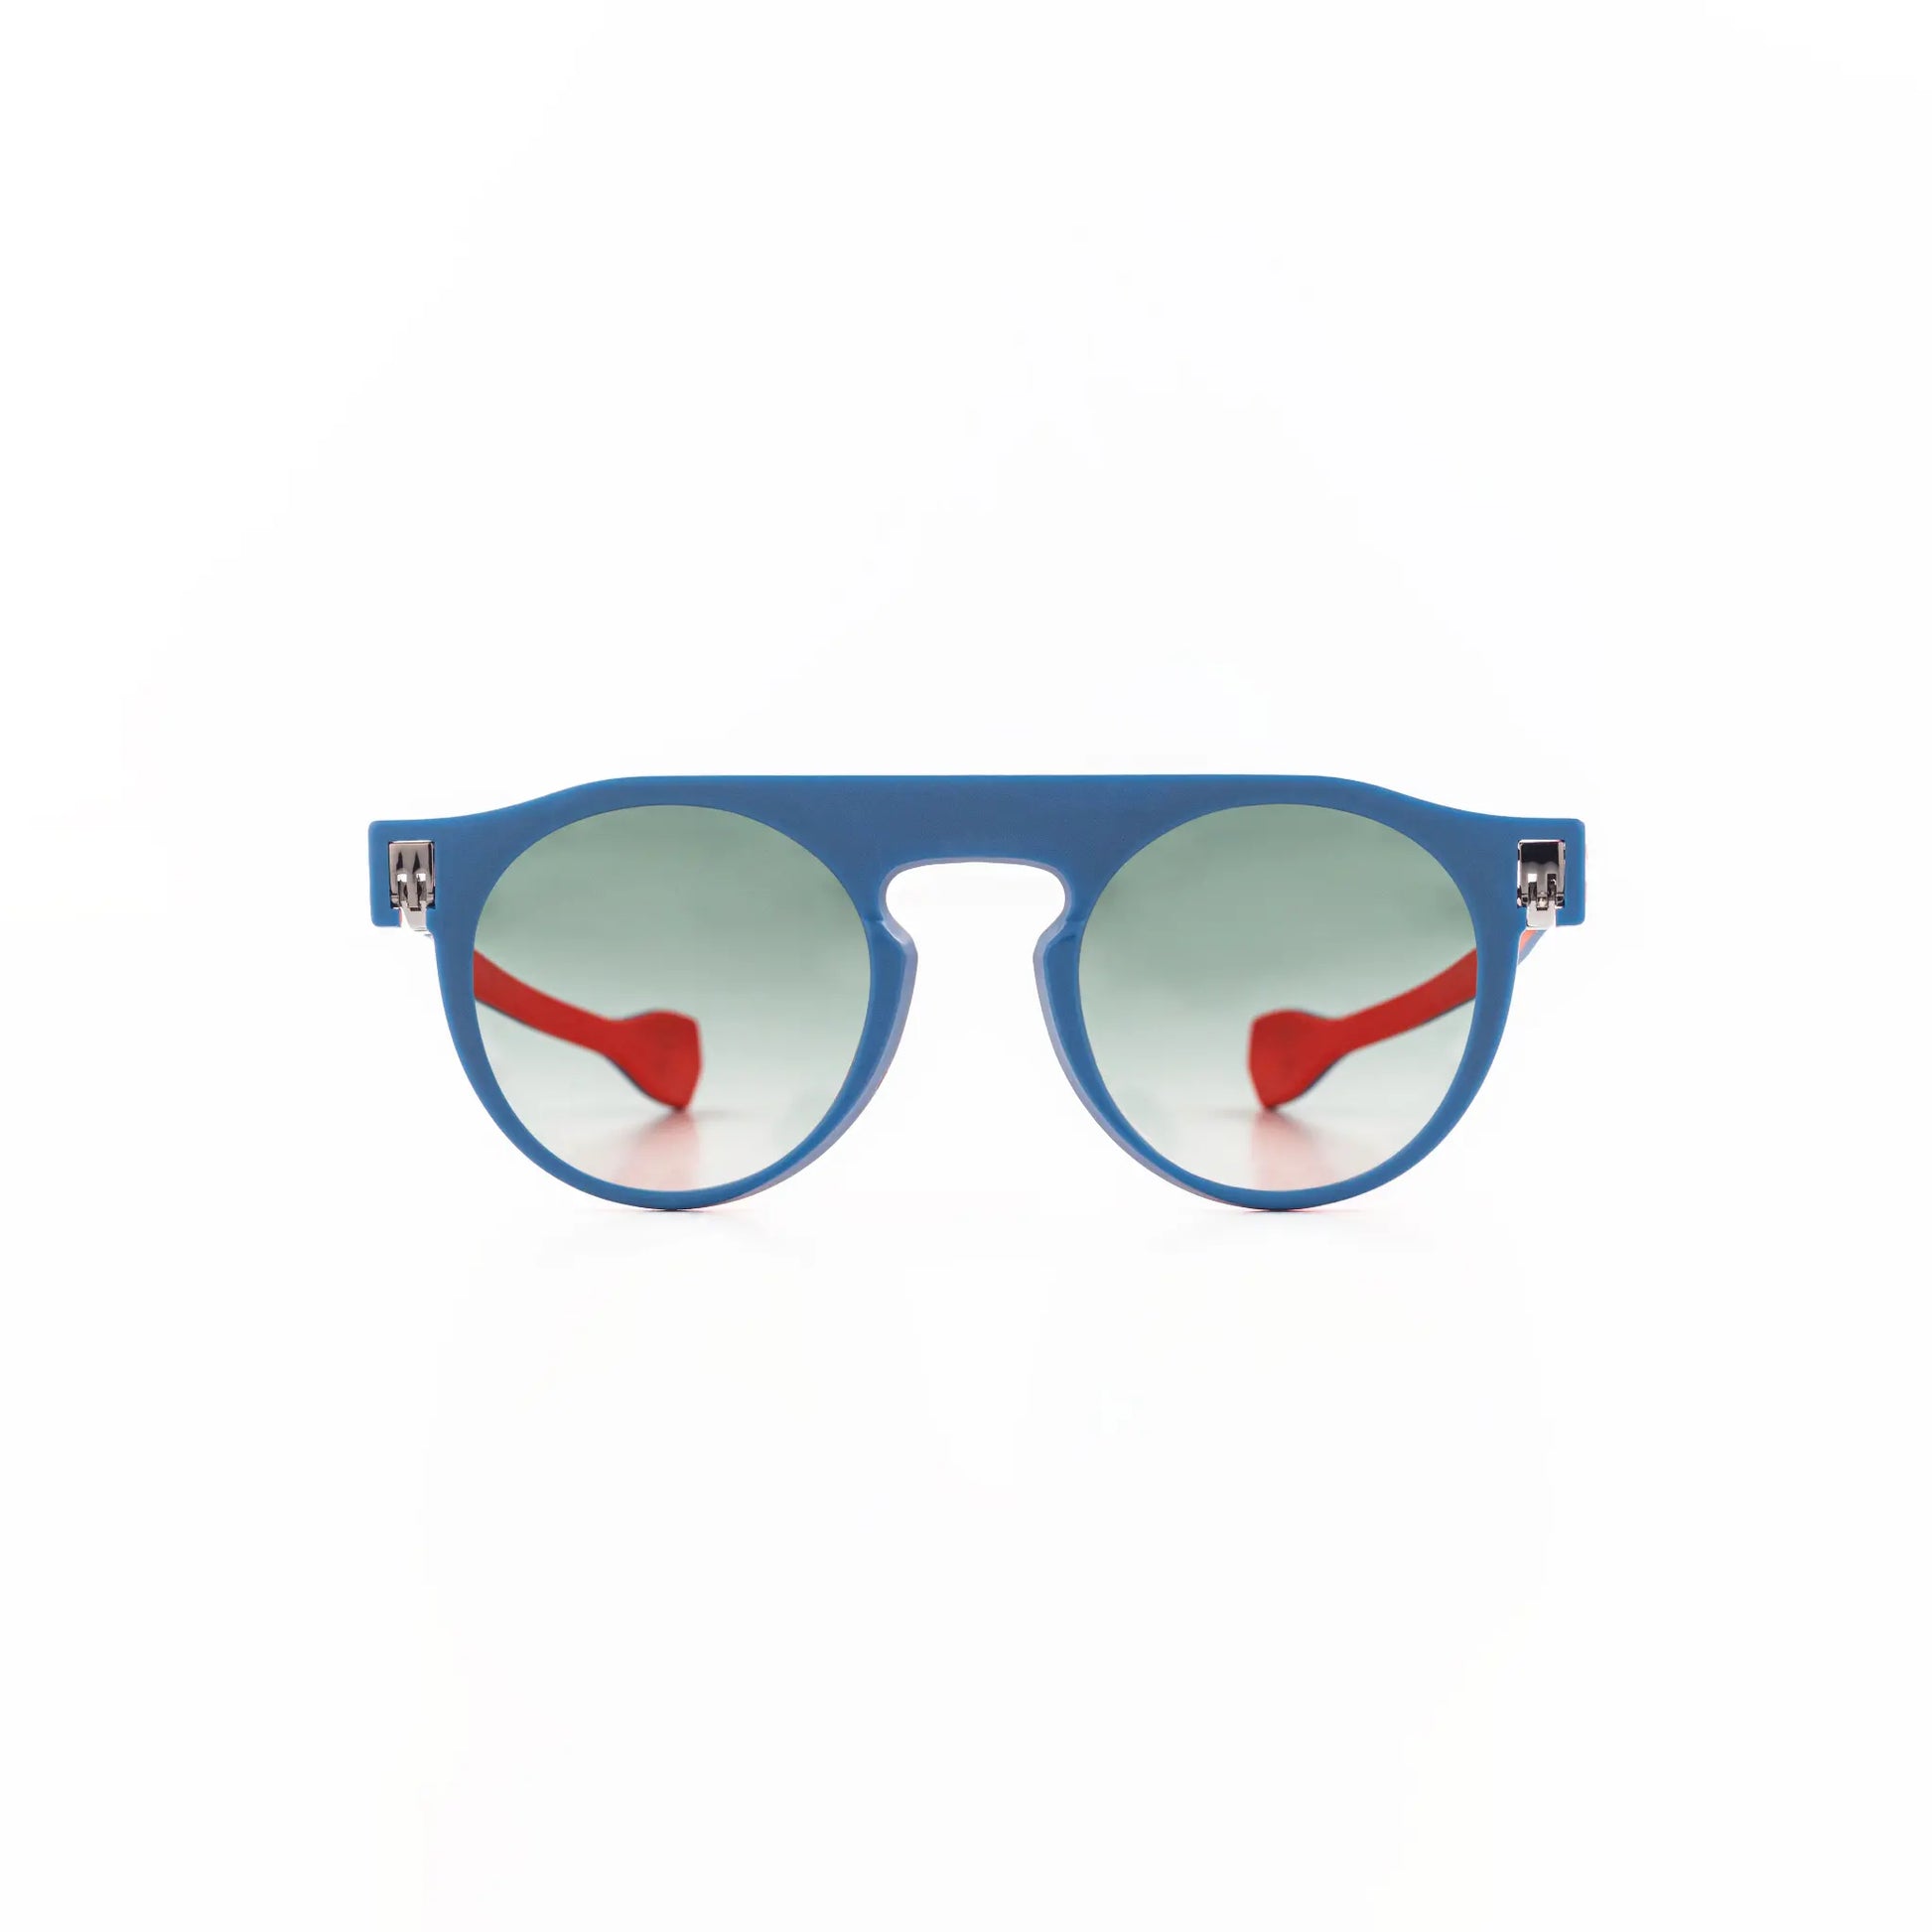 Reverso sunglasses blue & red reversible & ultra light front view 2